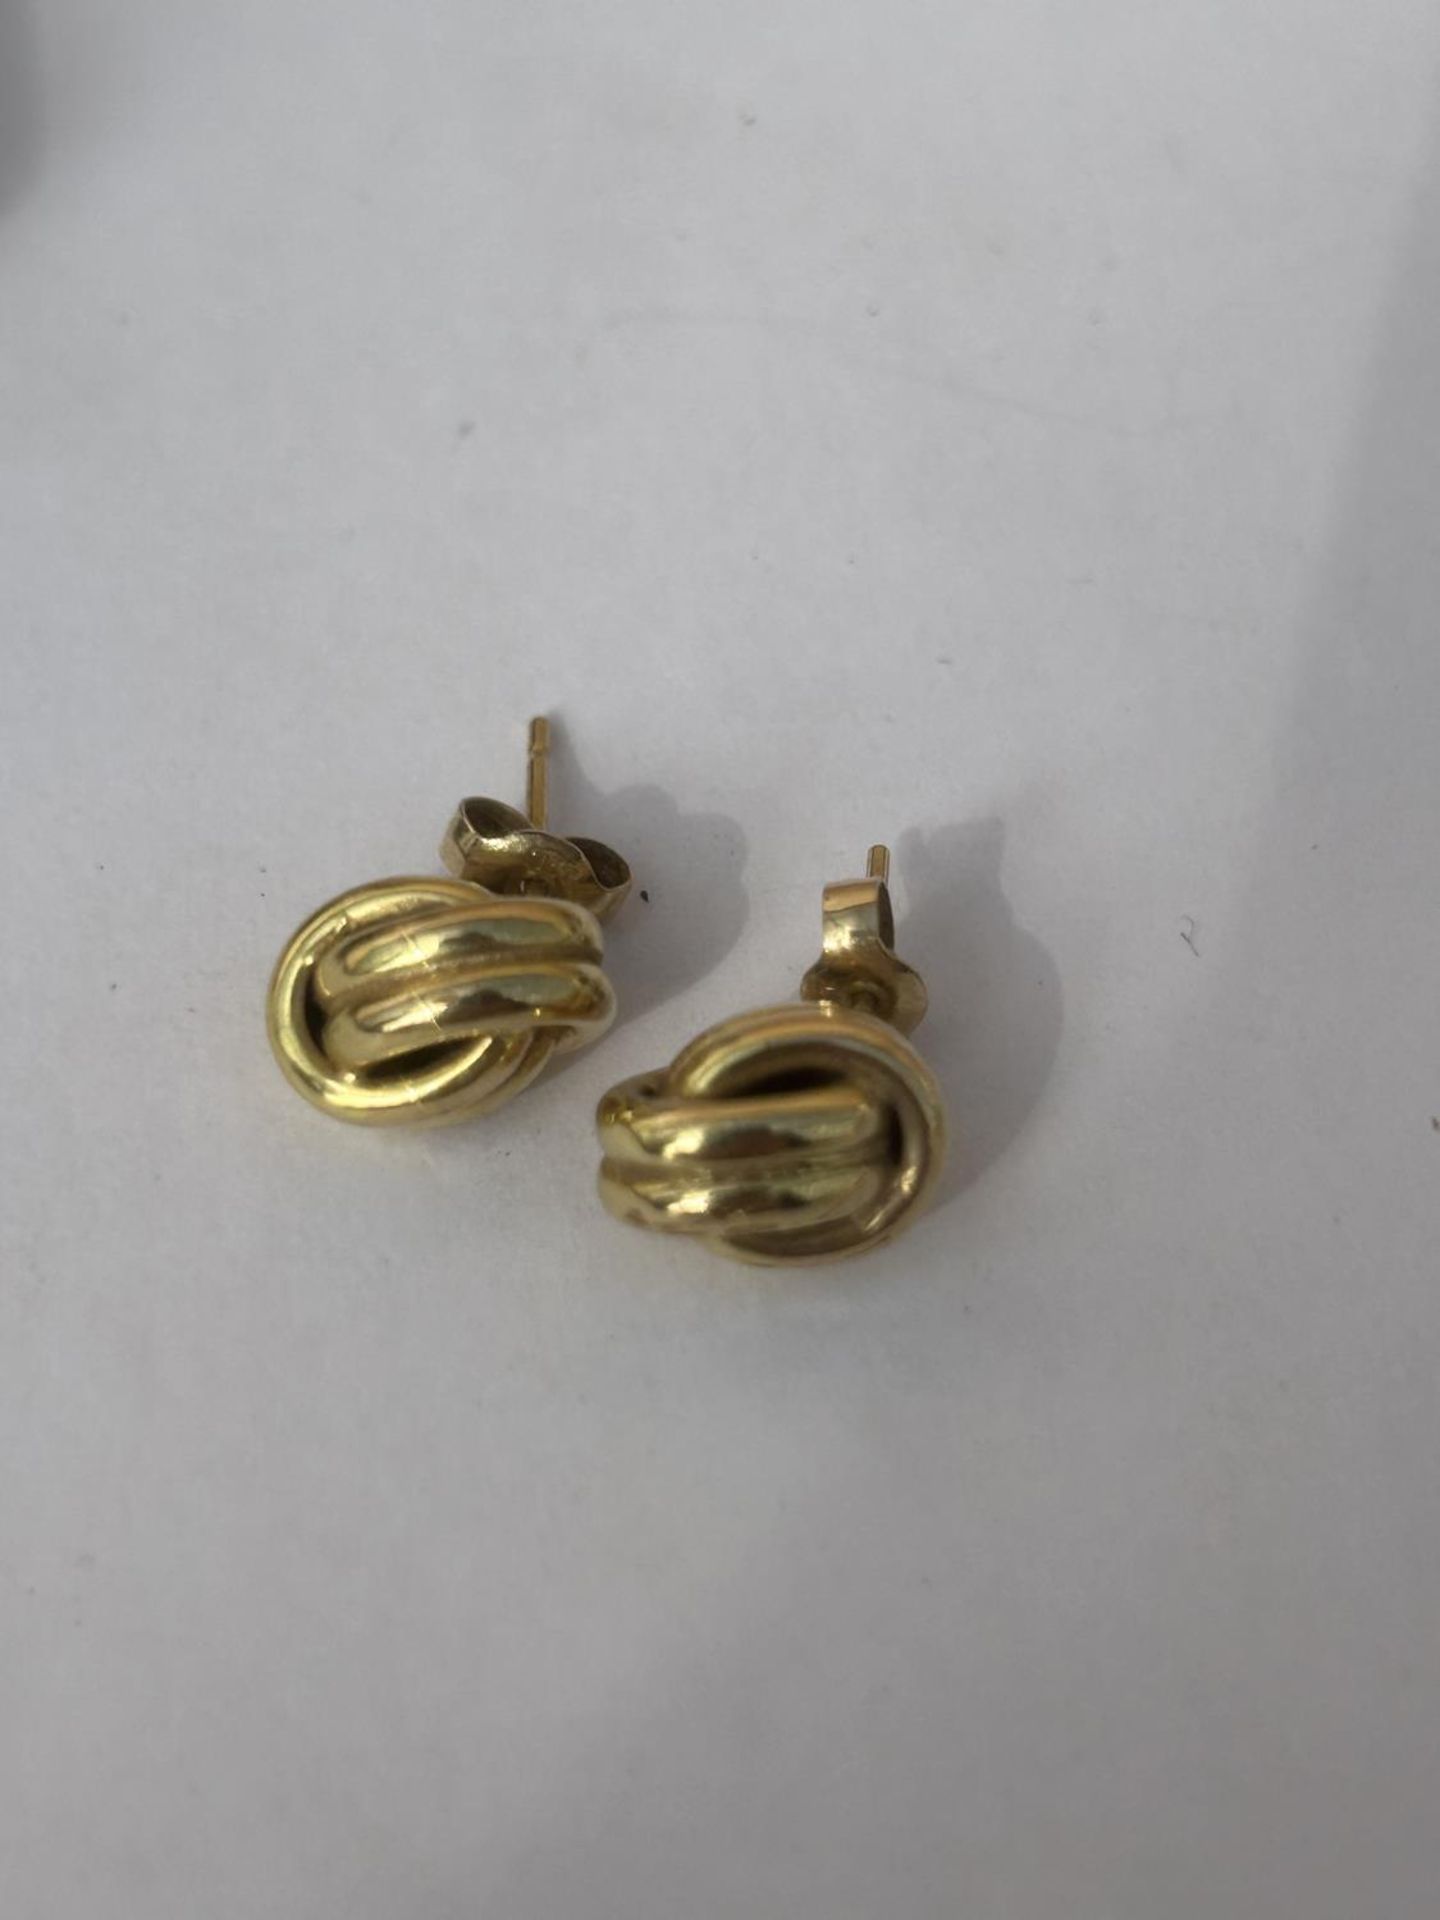 A PAIR OF 9CT GOLD DOUBLE ROW KNOT STUD EARRINGS COMPLETE WITH GOLD BUTTERFLY BACKS AND PRESENTATION - Image 2 of 4